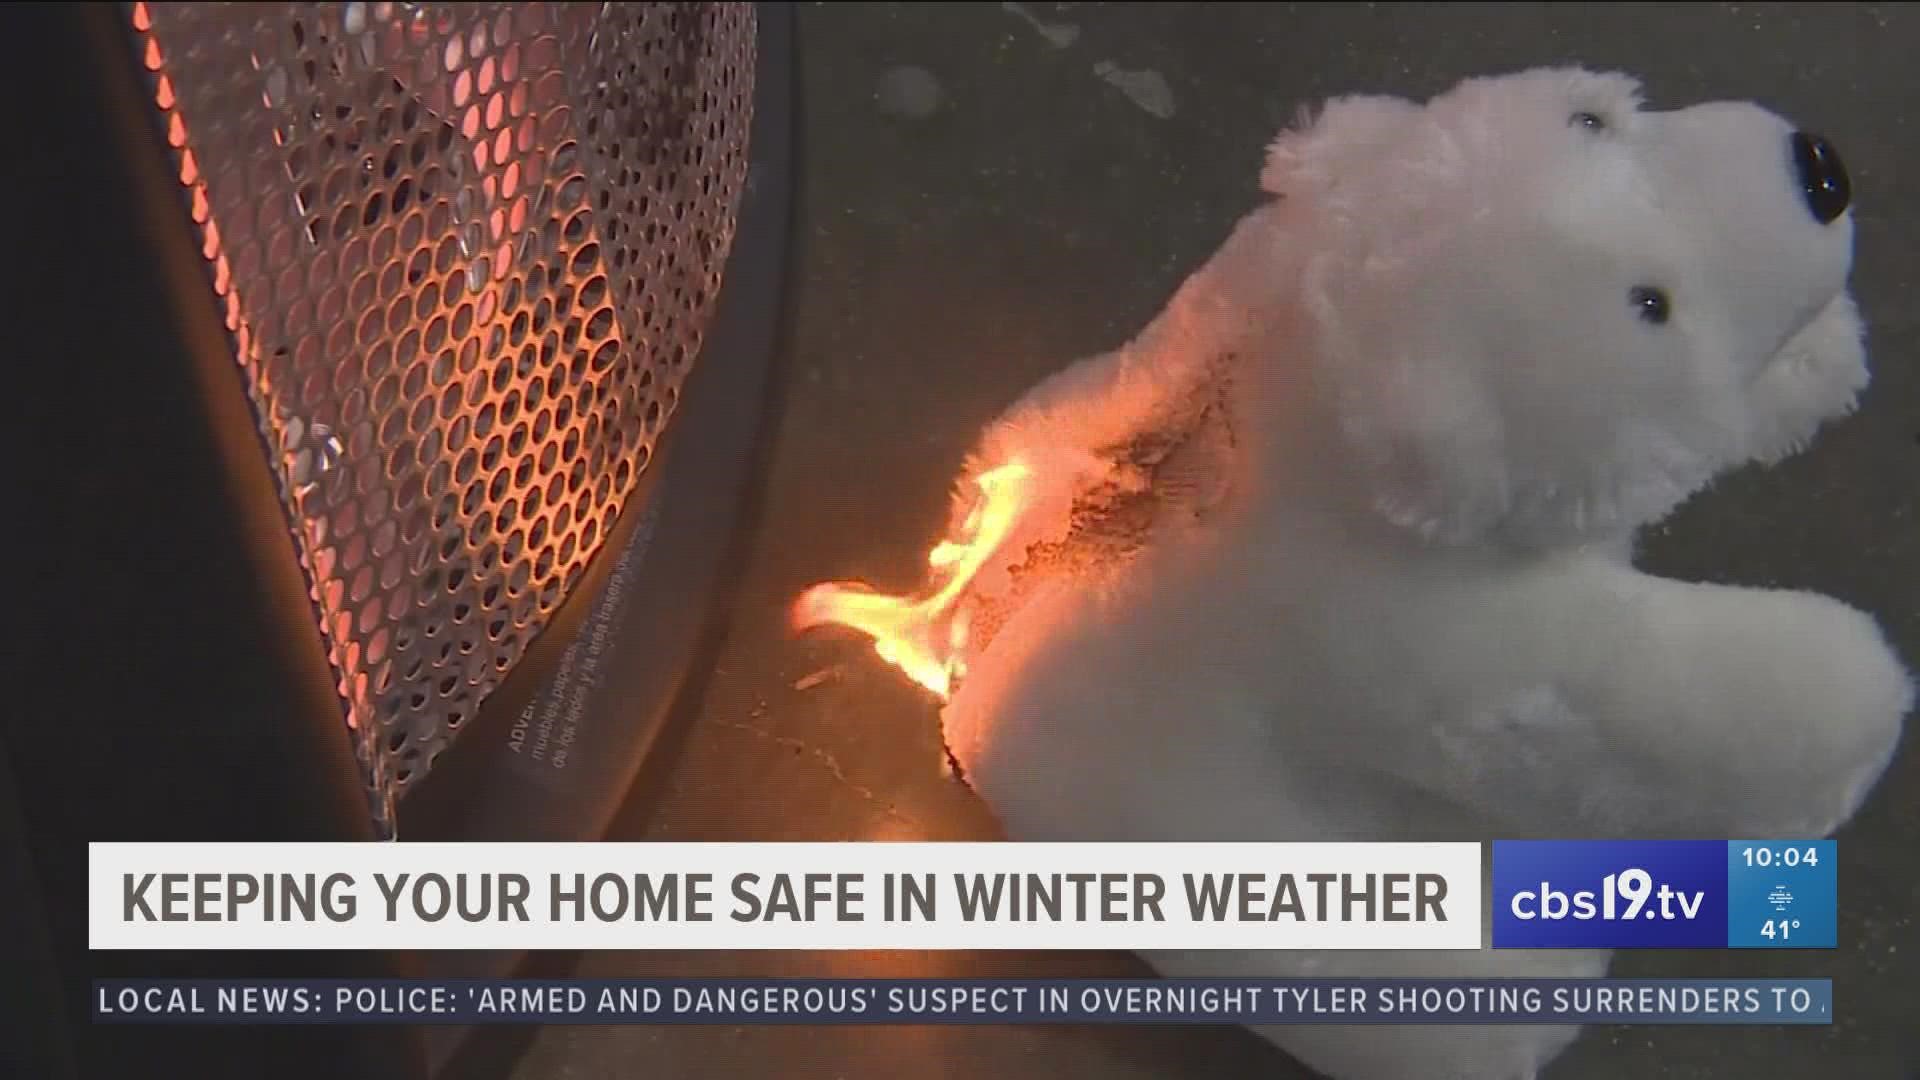 How to keep your home safe in winter weather